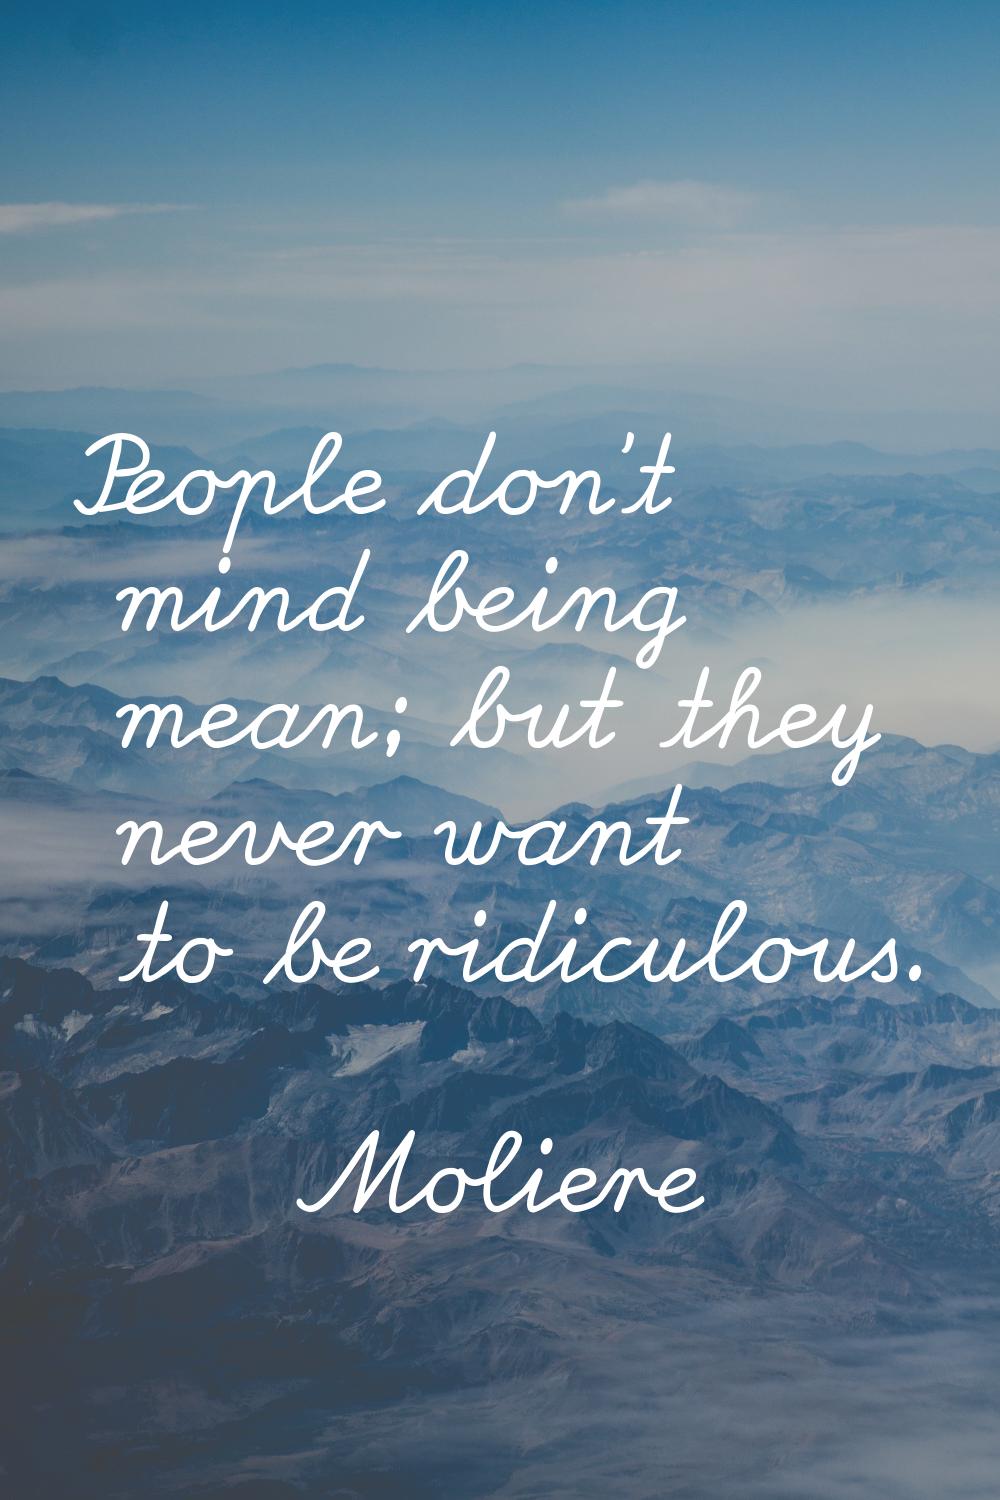 People don't mind being mean; but they never want to be ridiculous.